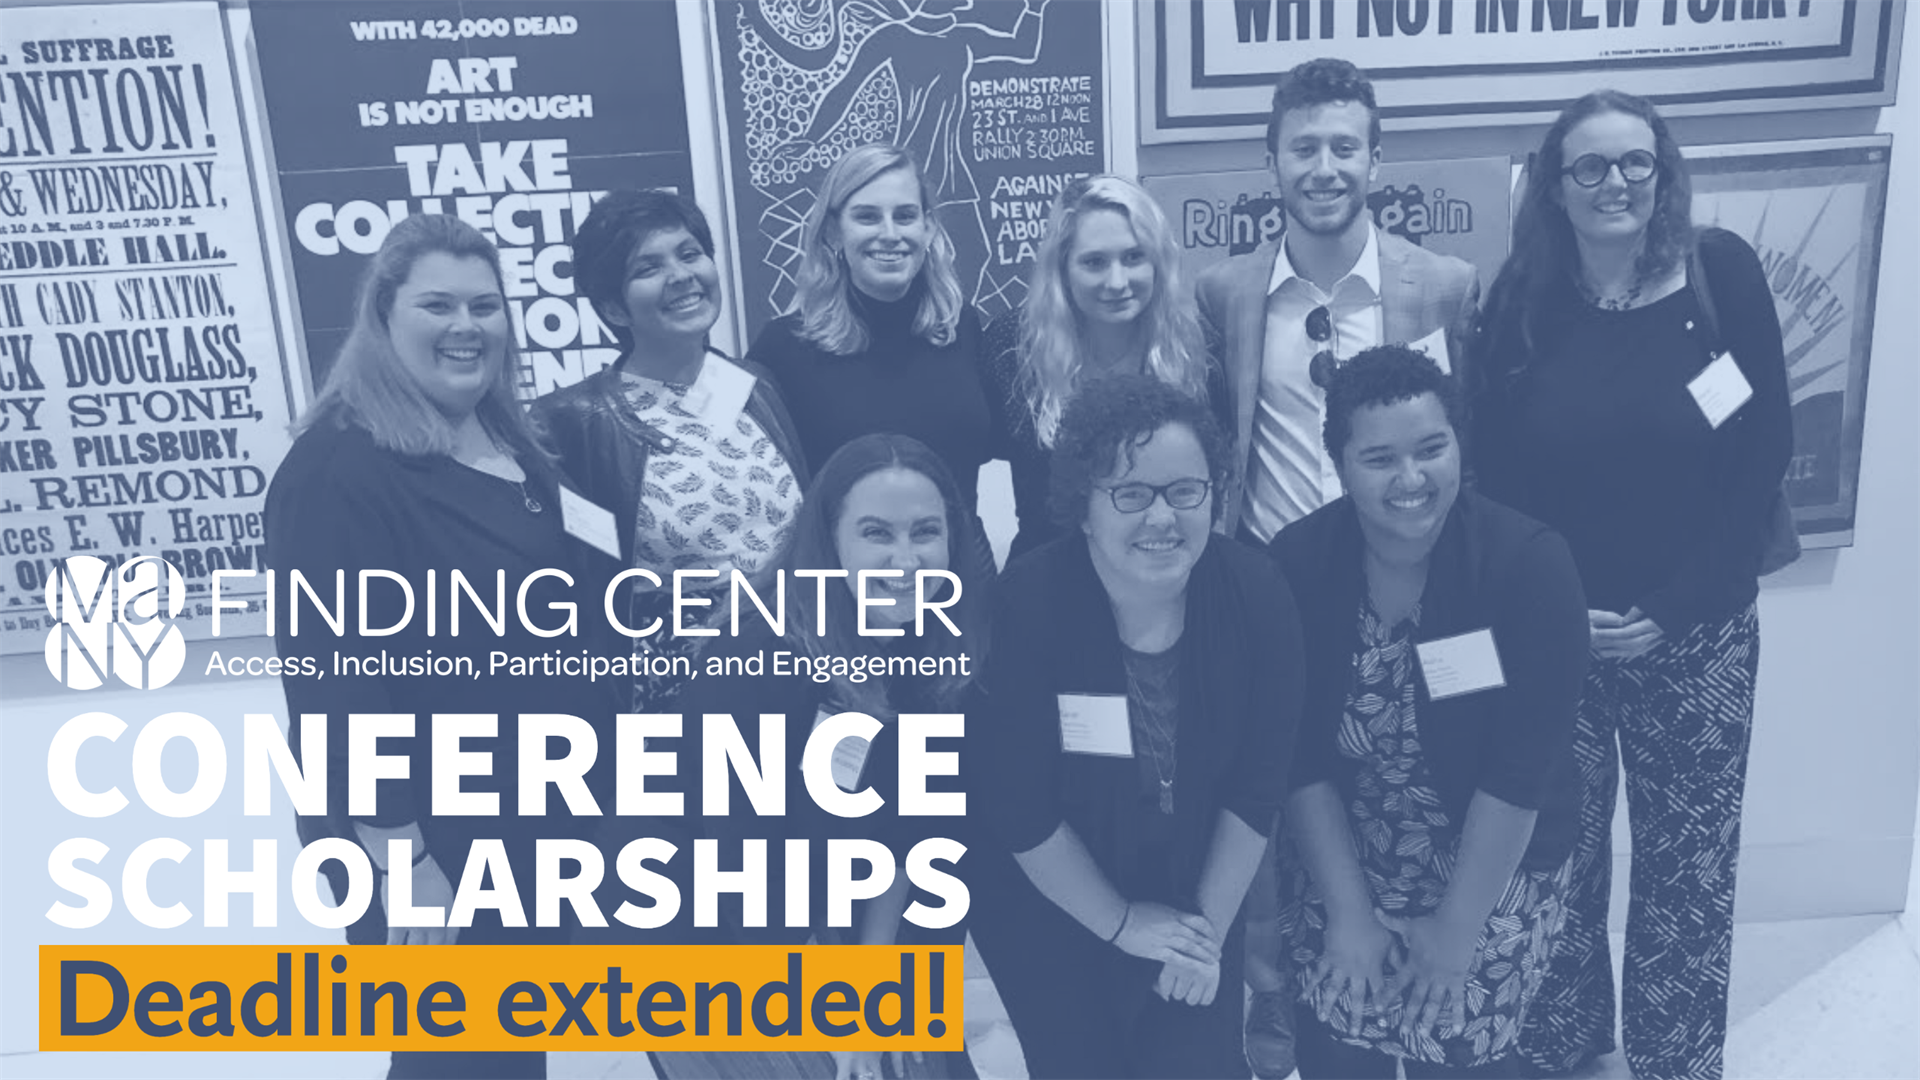 Conference Scholarship Applications Due Friday!